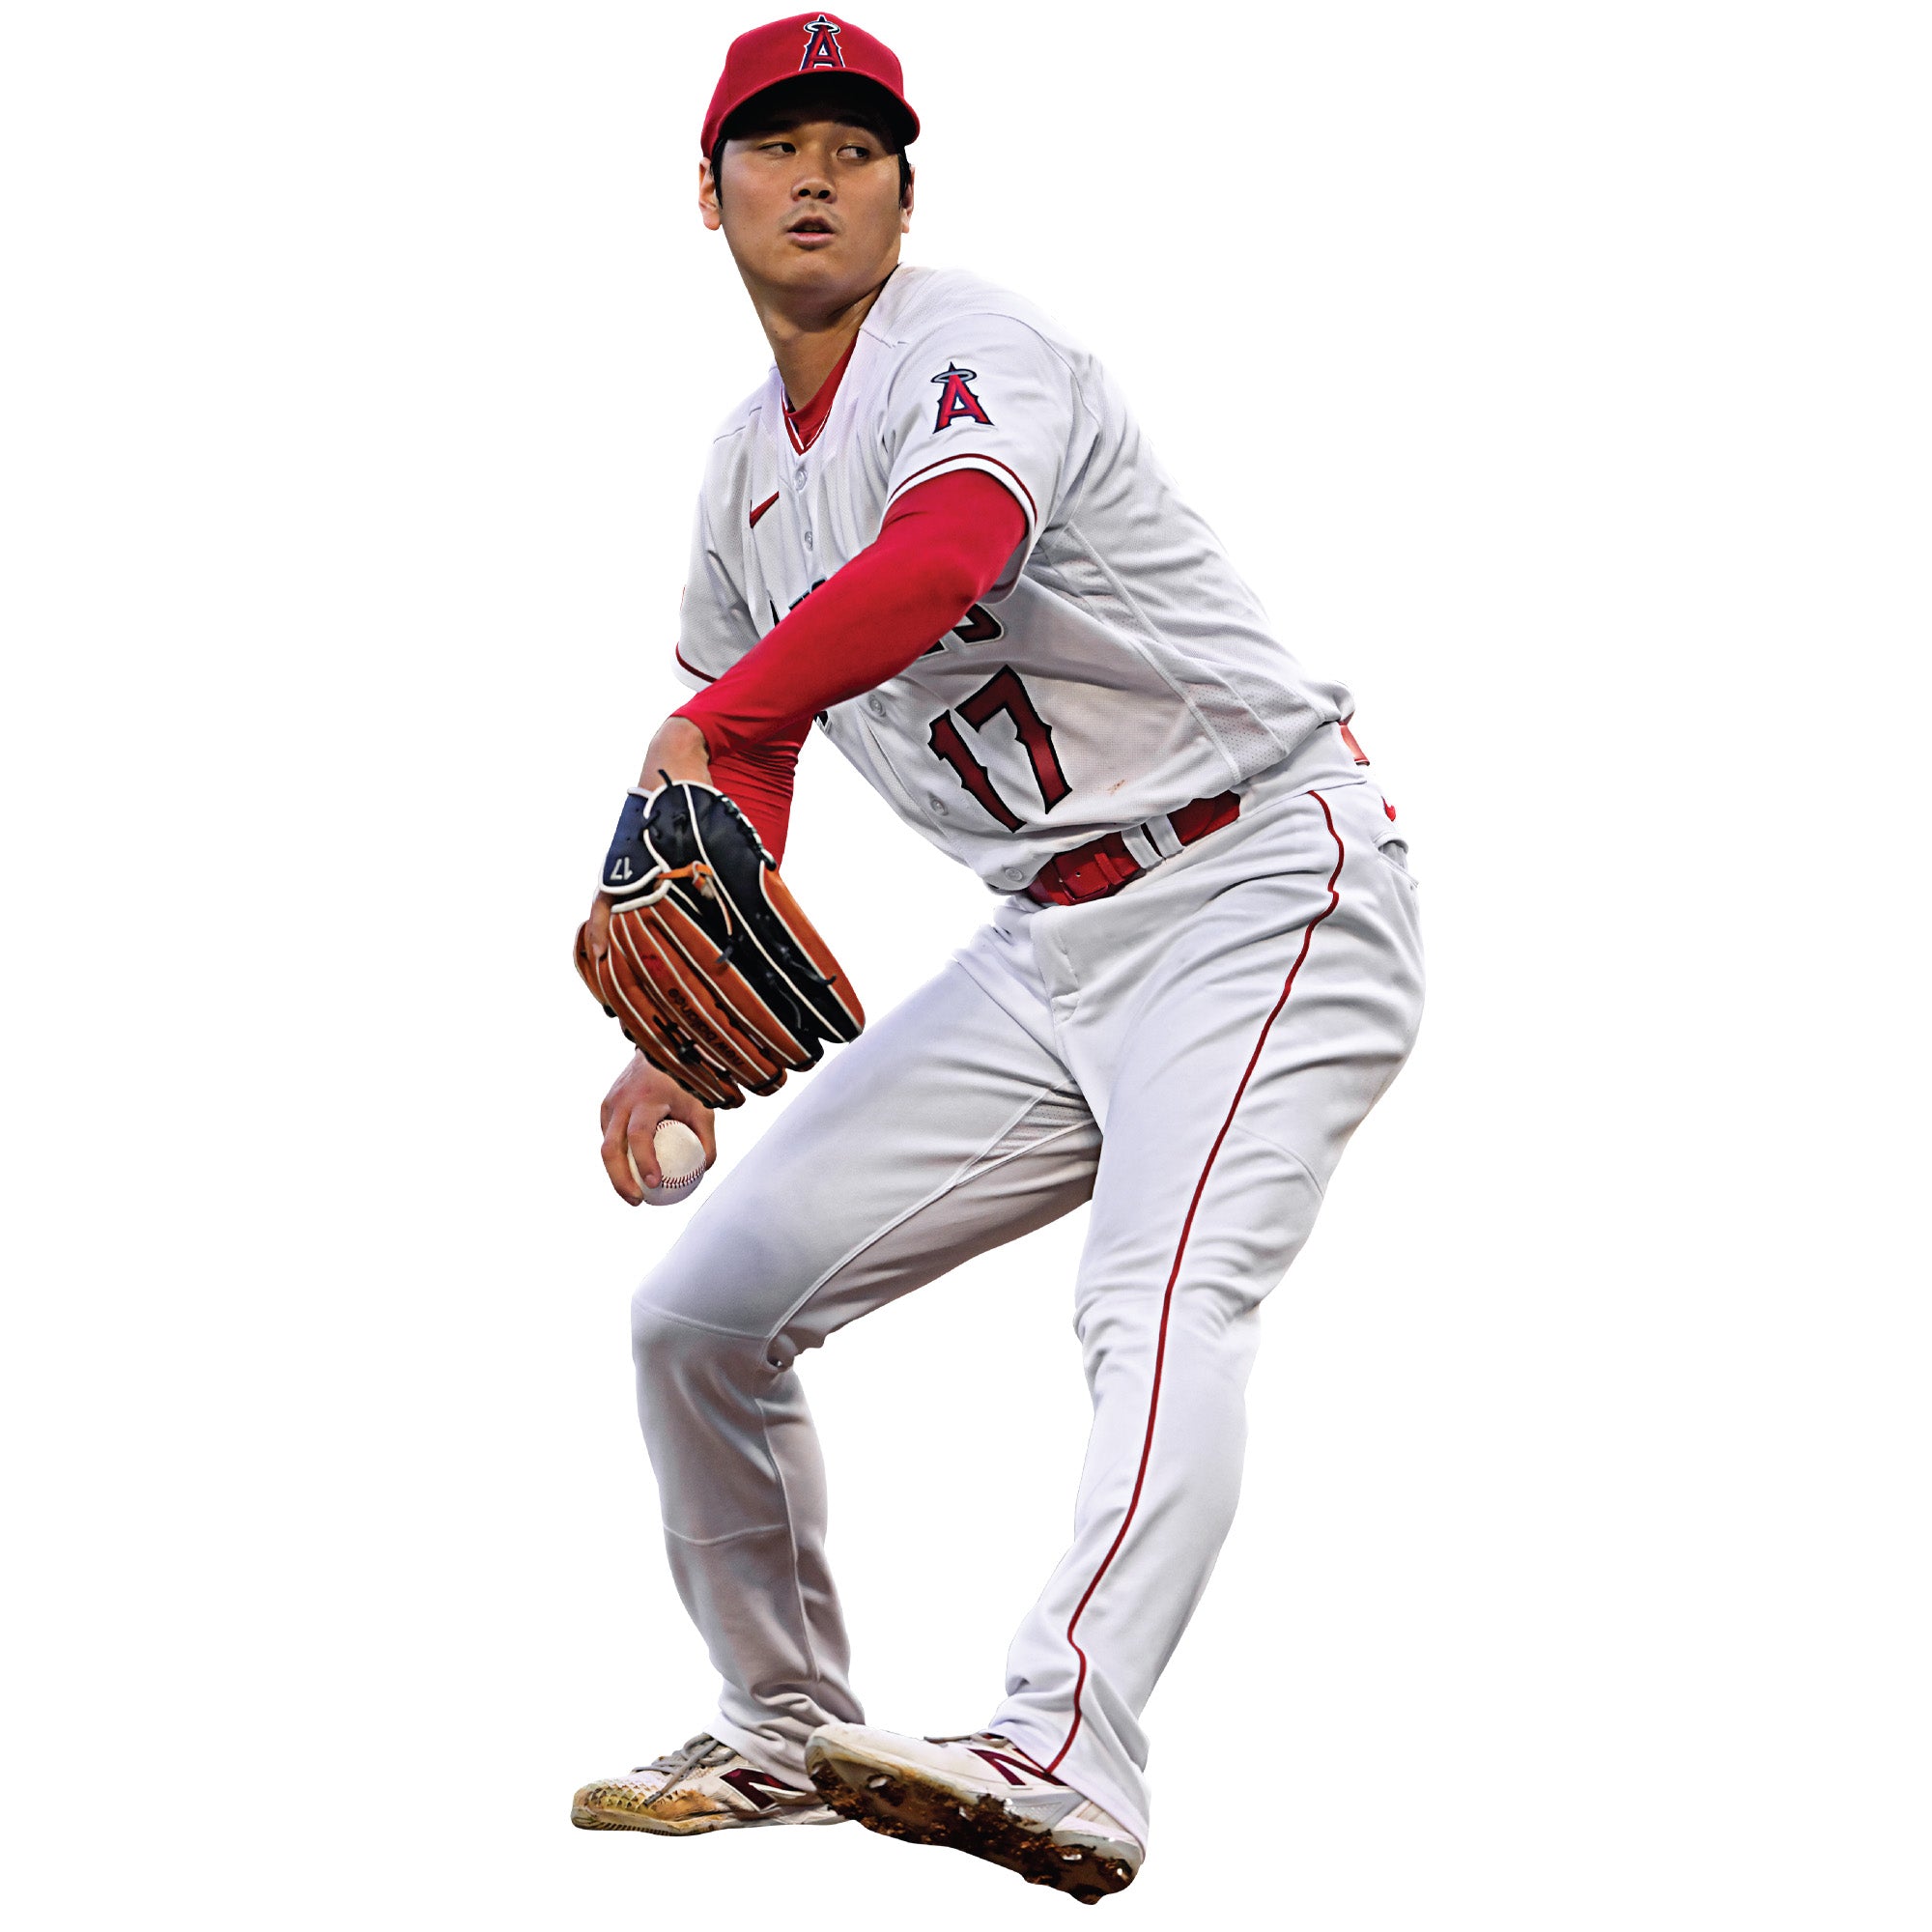 Los Angeles Angels: Shohei Ohtani Pitching - Officially Licensed